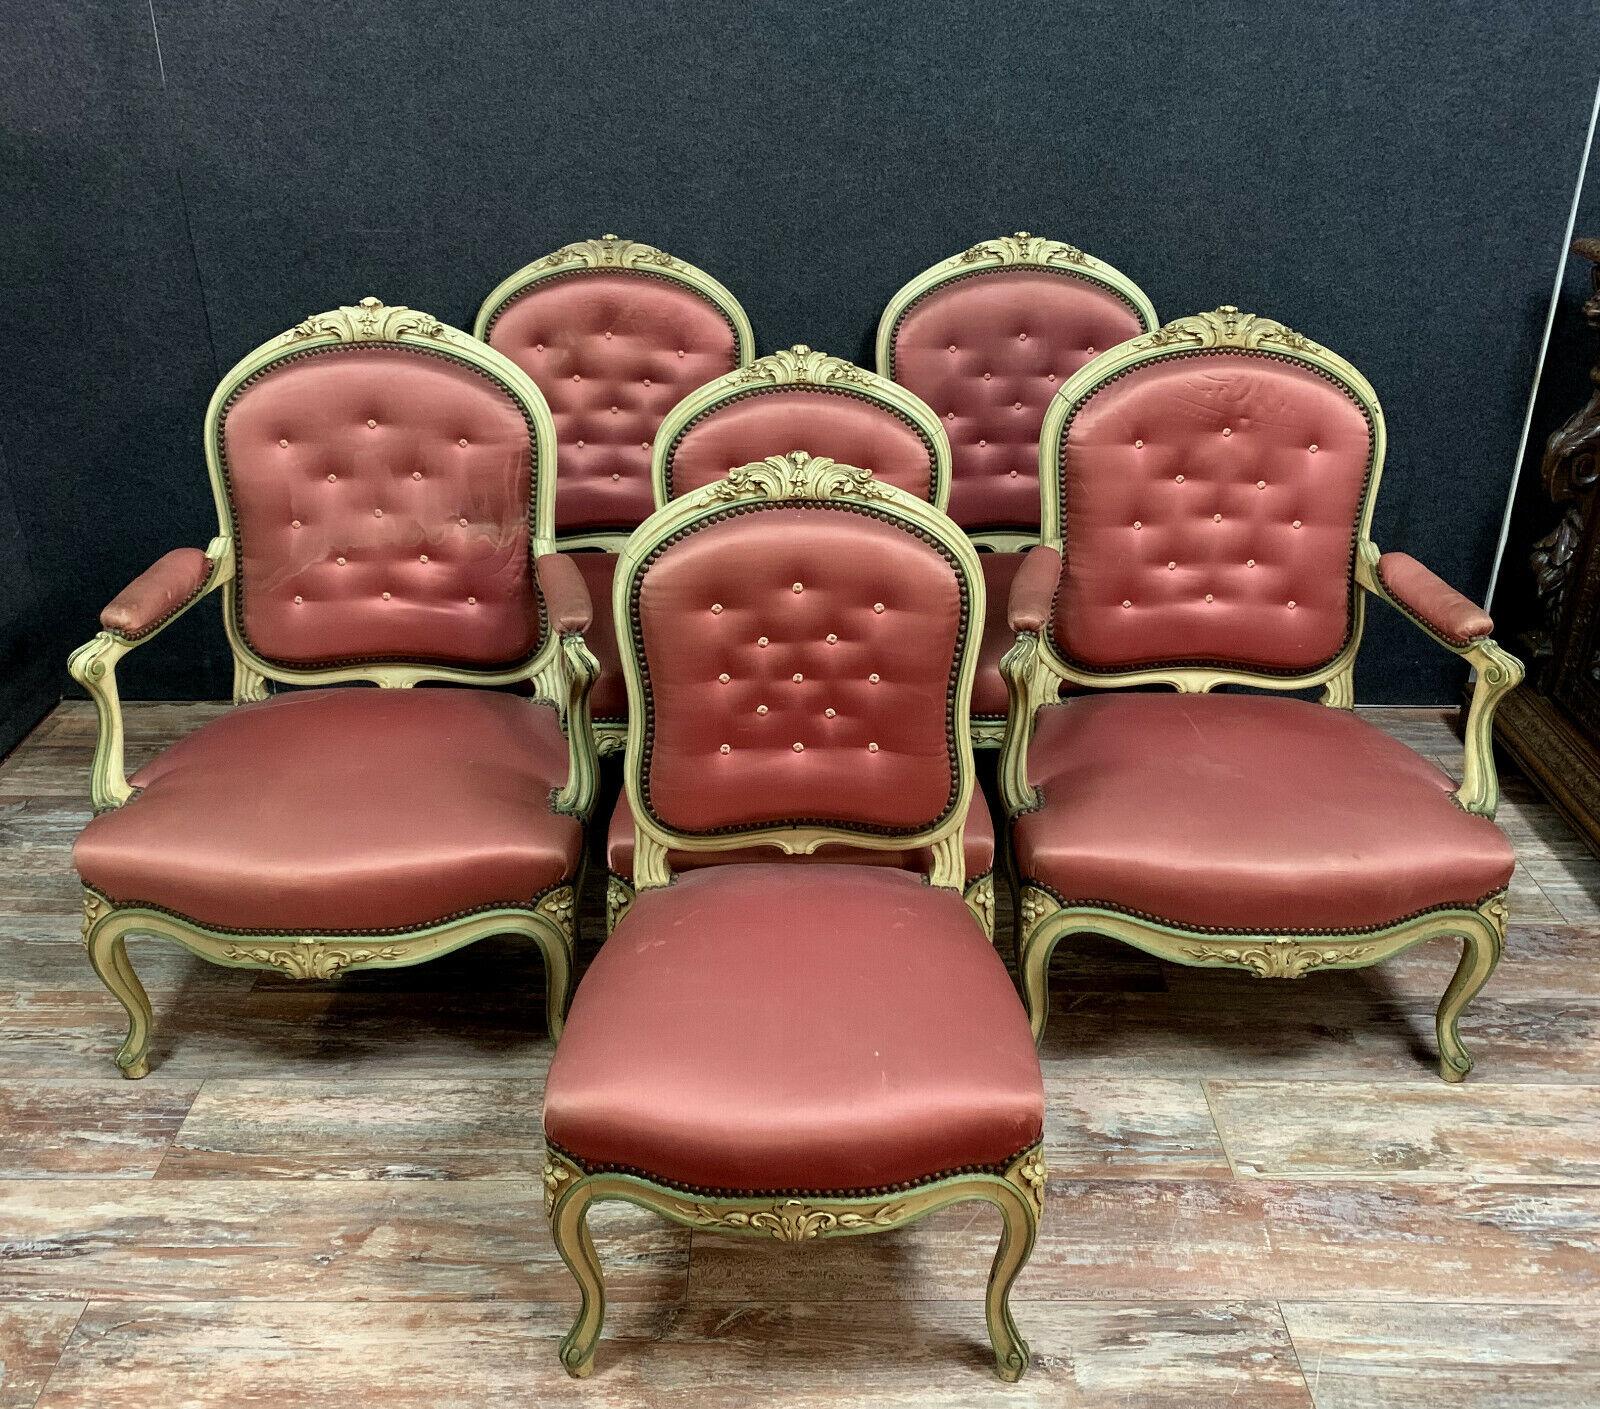 Louis XV Lacquered Wood Salon Furniture Set with 4 Armchairs and 2 Chairs -1X01 For Sale 3